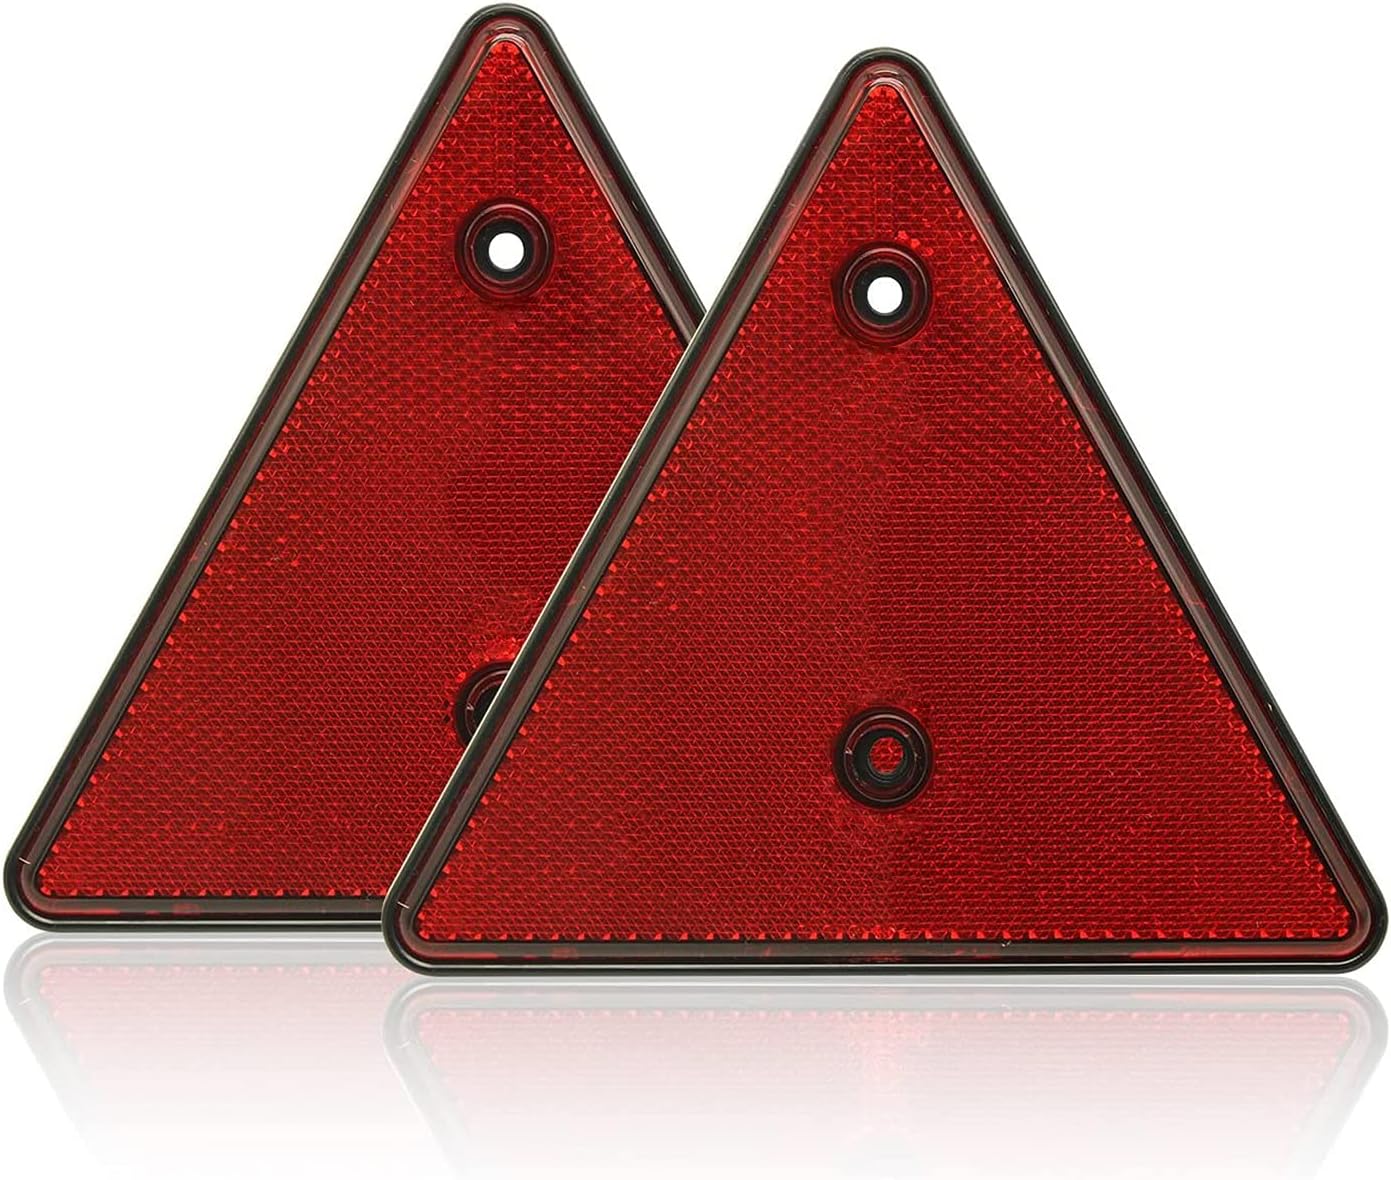 4 x Red Triangle Reflectors Screw Mount for Driveways,Fences,Posts,Garden Walls 